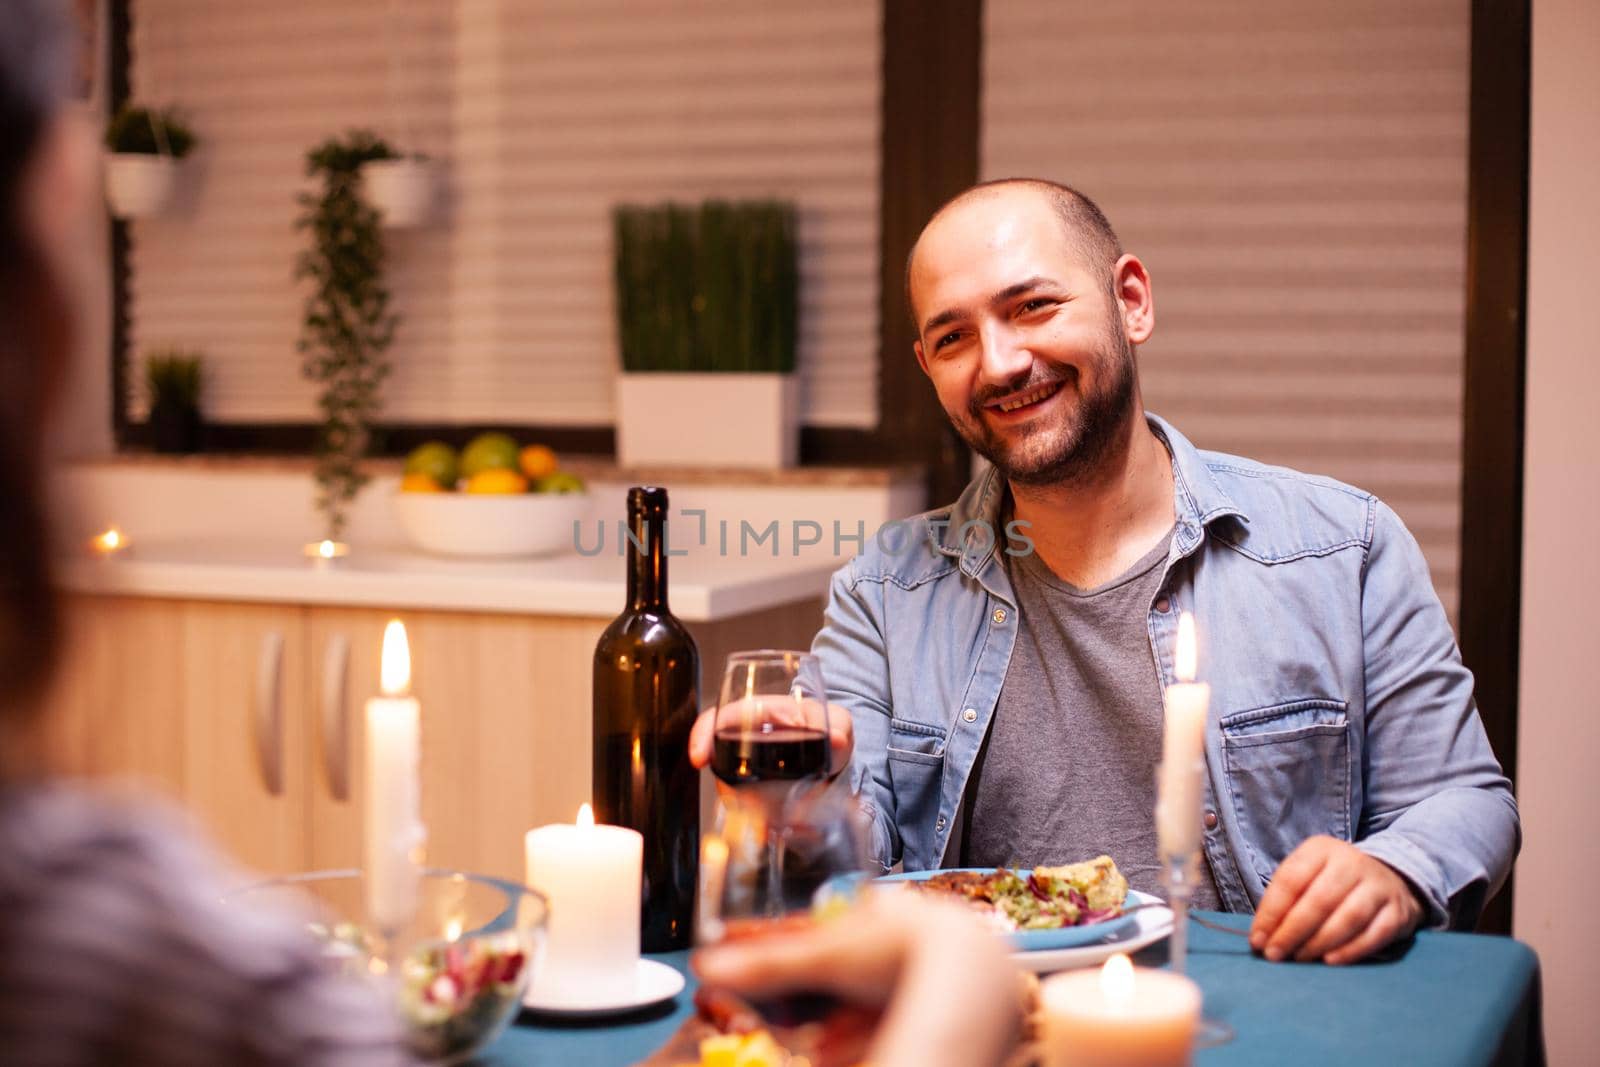 Boyfriend smiling at wife enjoying anniversary celebration in kitchen. Talking happy sitting at table dining room, enjoying the meal at home having romantic time at candle lights.